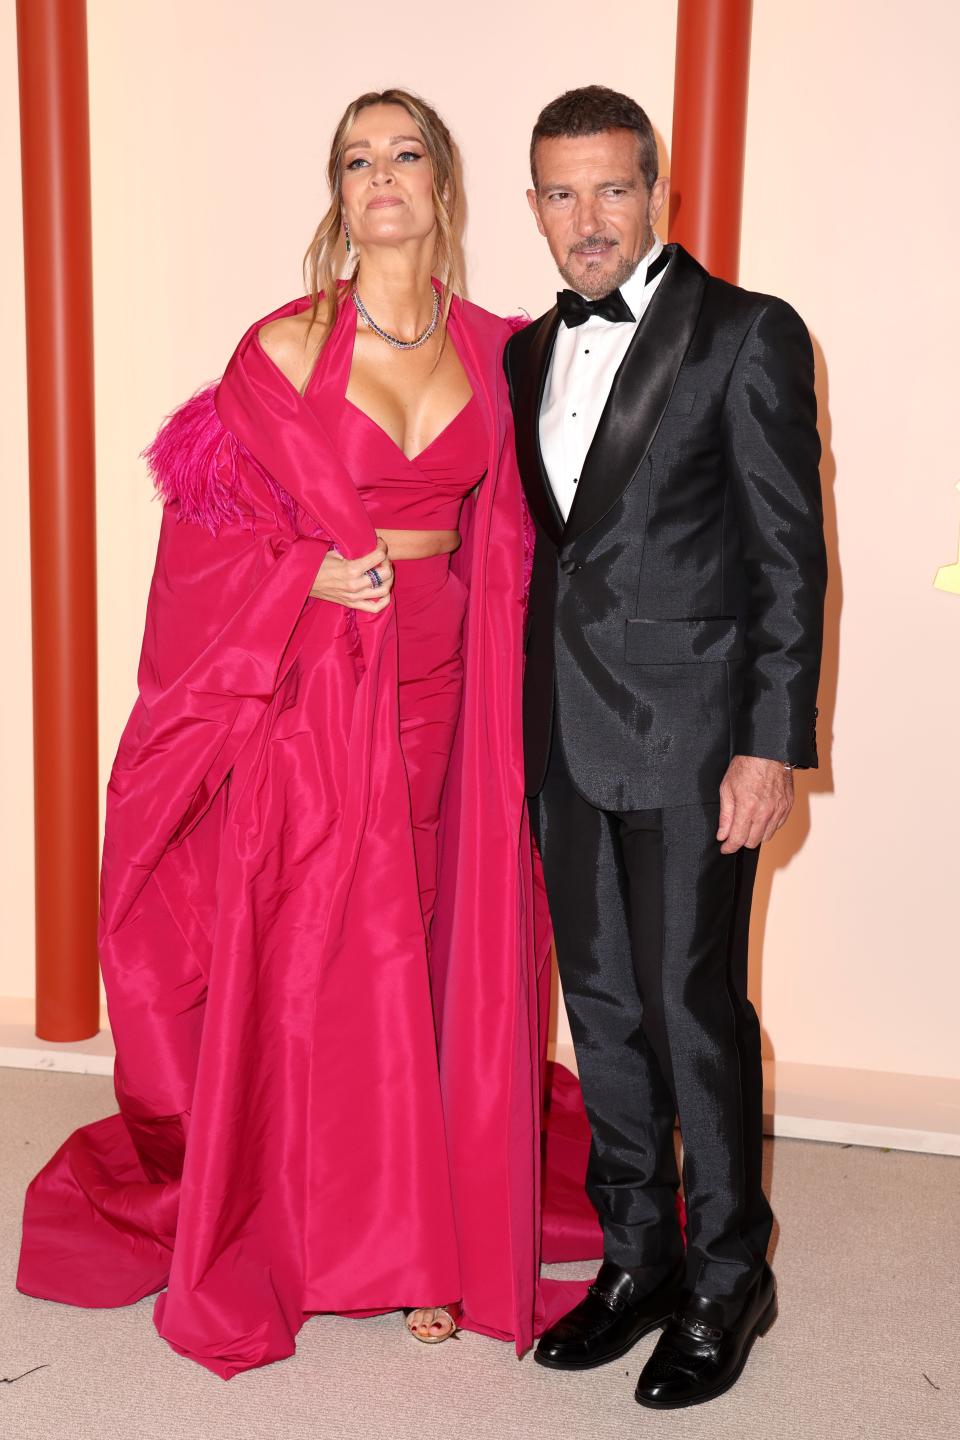 Antonio and Nicole looked fabulous together at the 2023 Oscars.